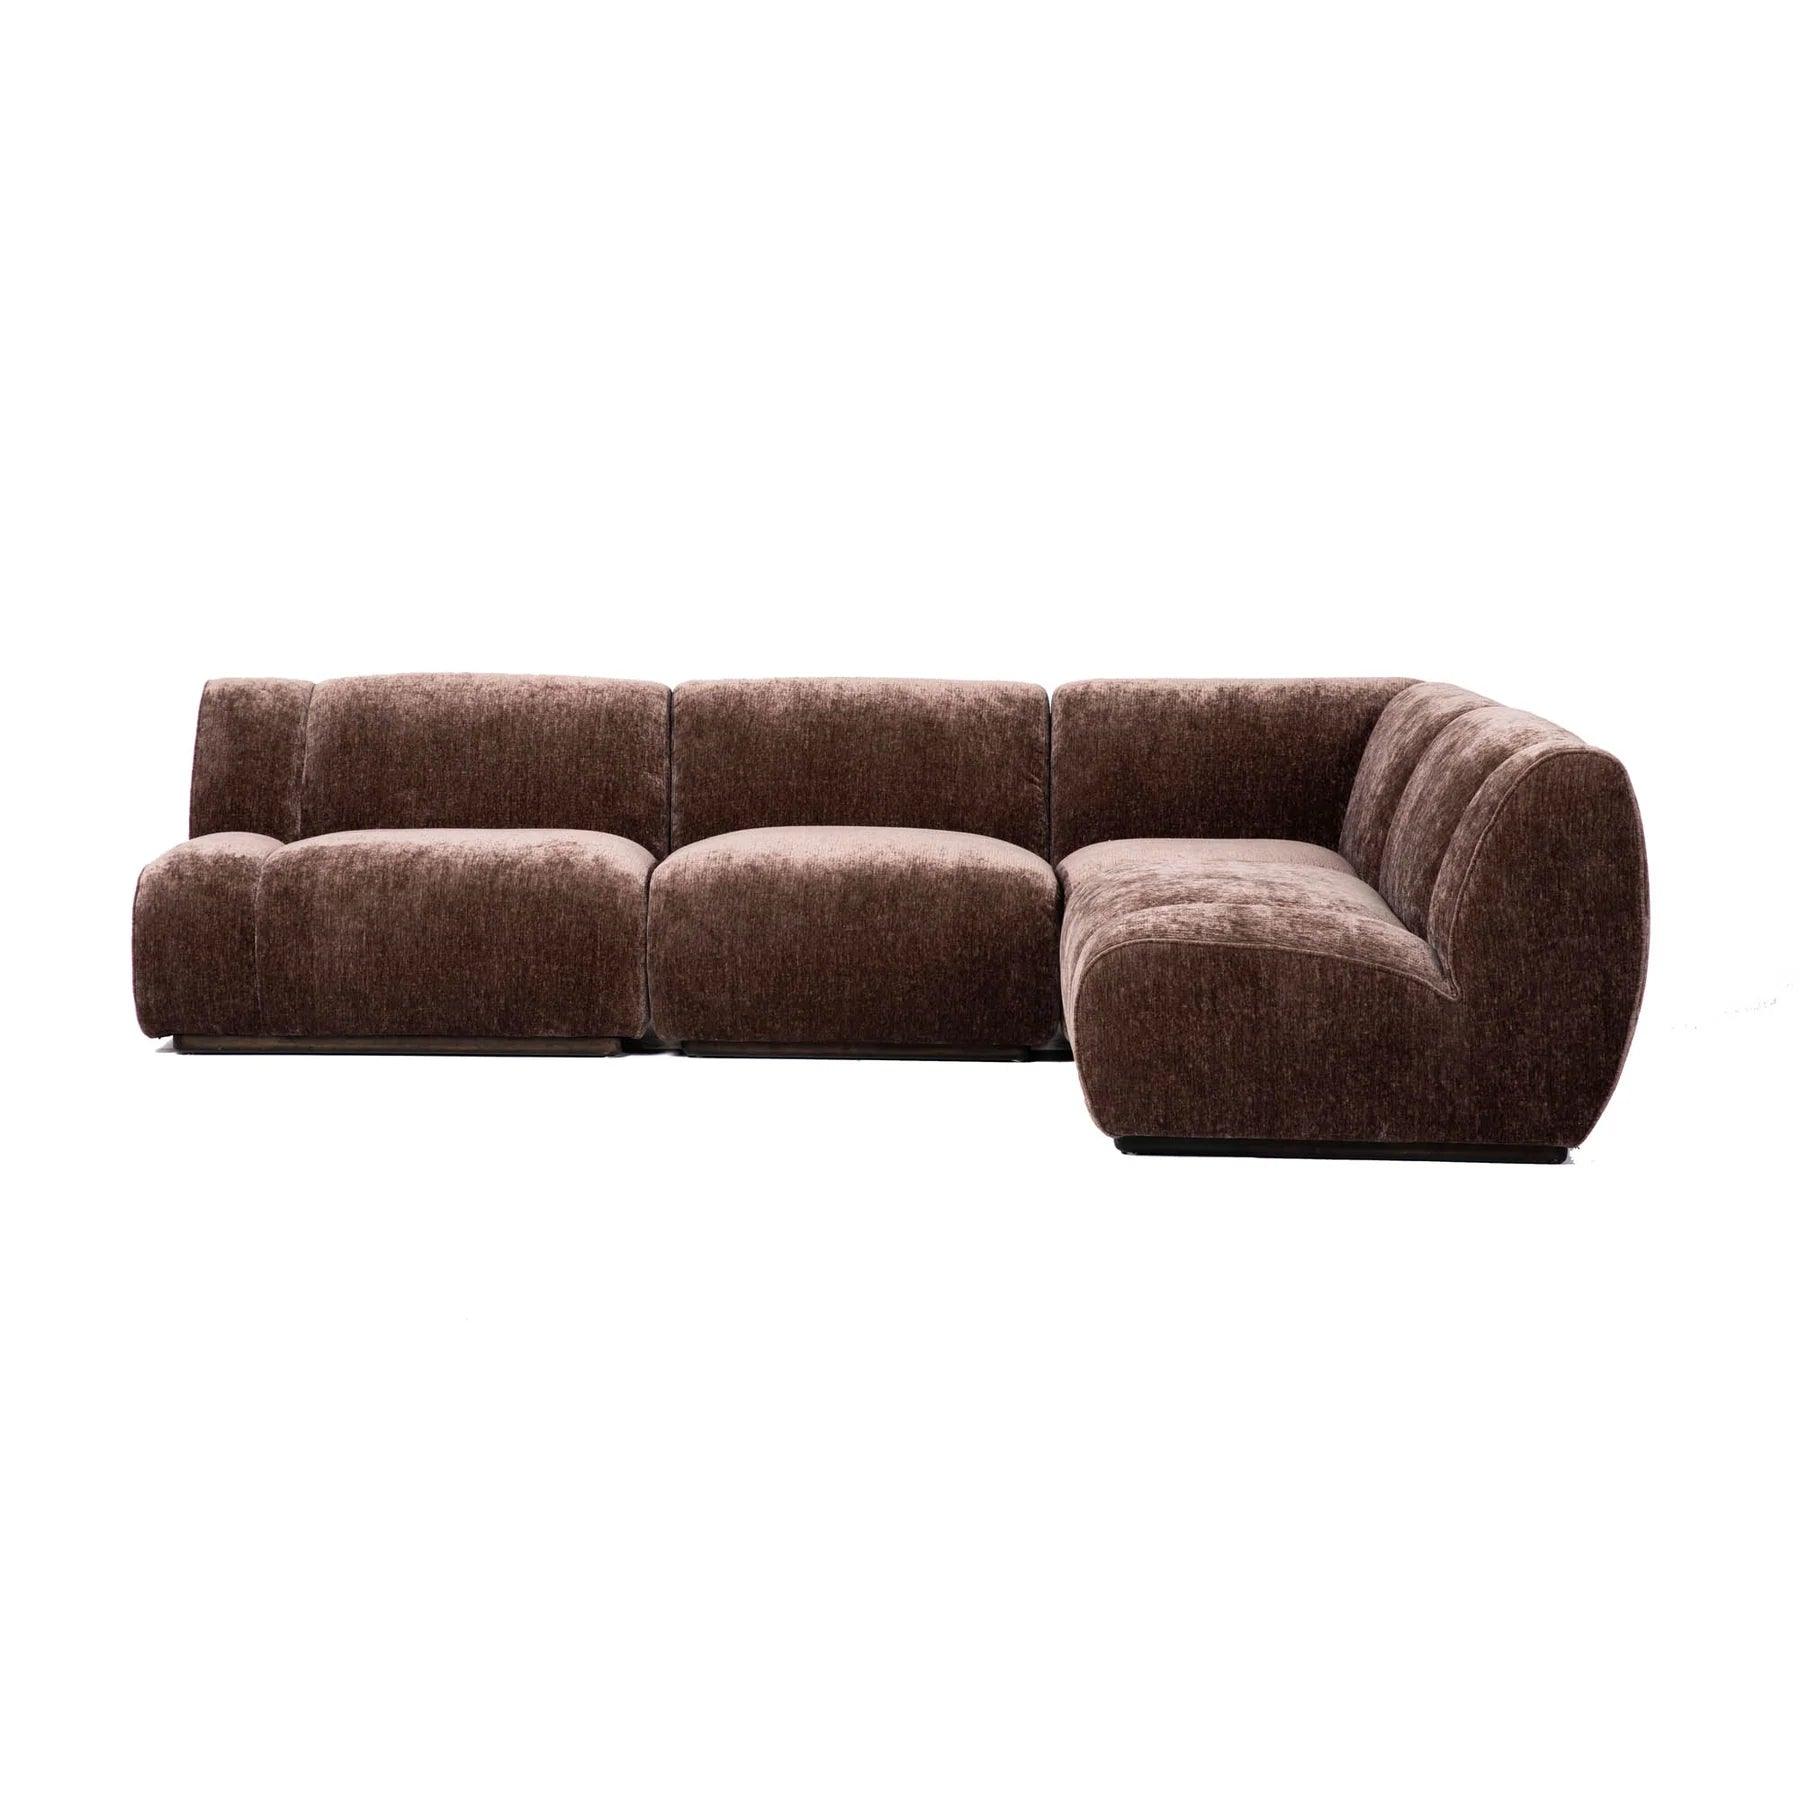 STERLING Modular 4 Piece Armless Sectional Sofa - Northern Interiors